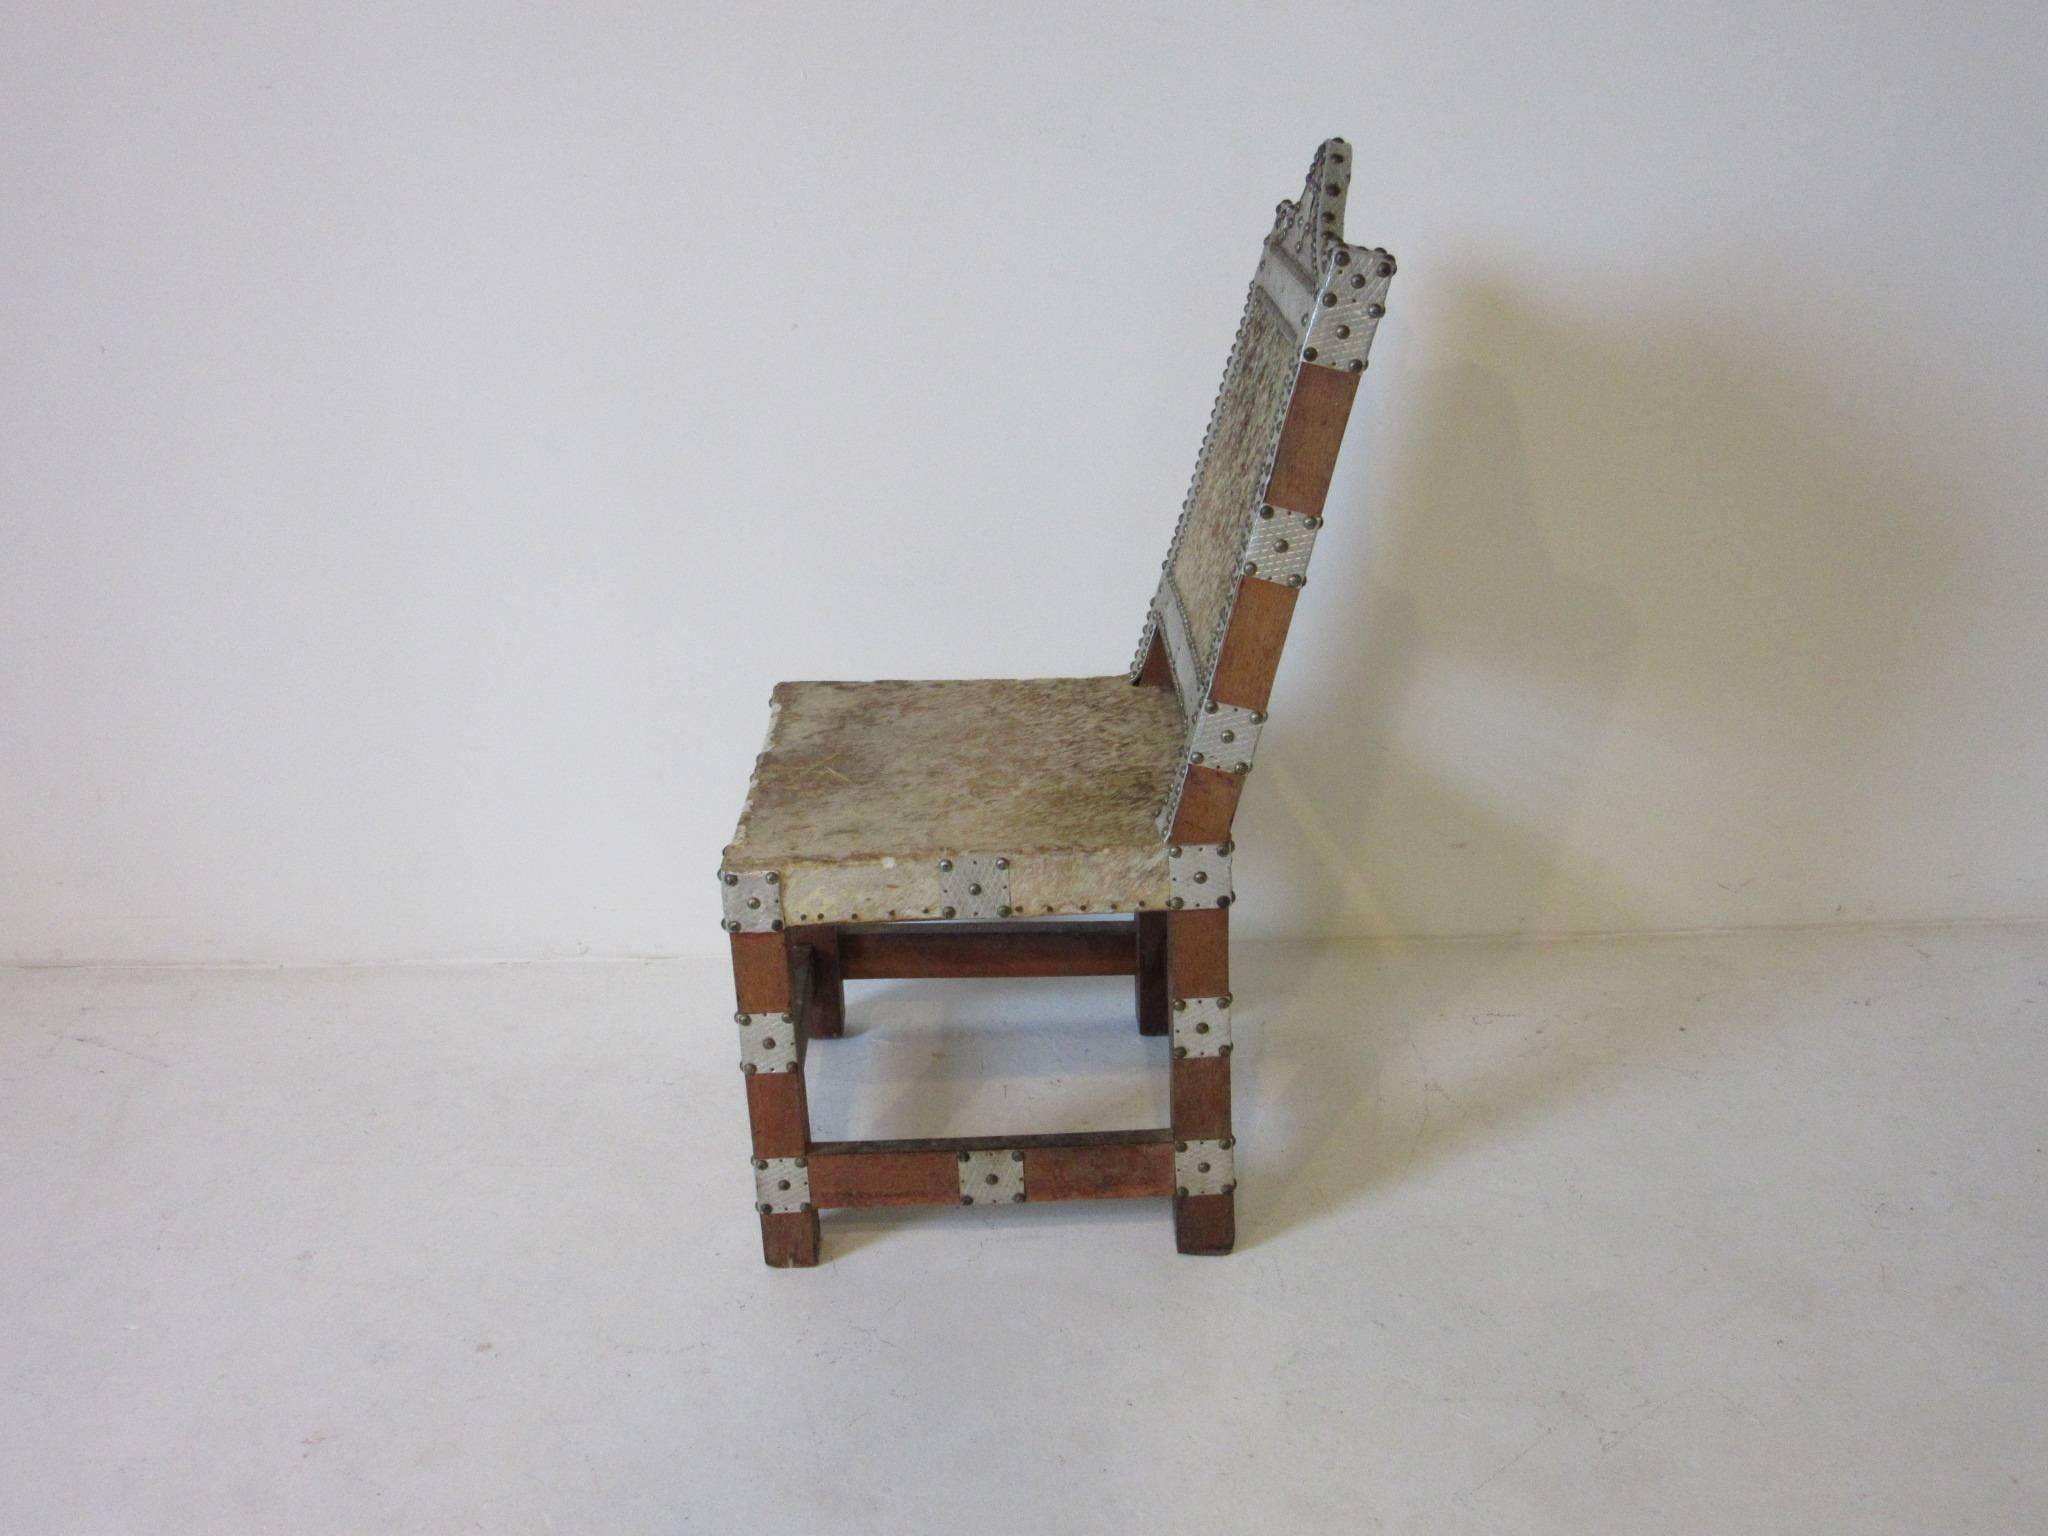 An African Royal or Prince chair with wood frame, animal skin seat and back embellished with nailed aluminum pieces and metal studs. In the style of the Asante or Ghana culture. 